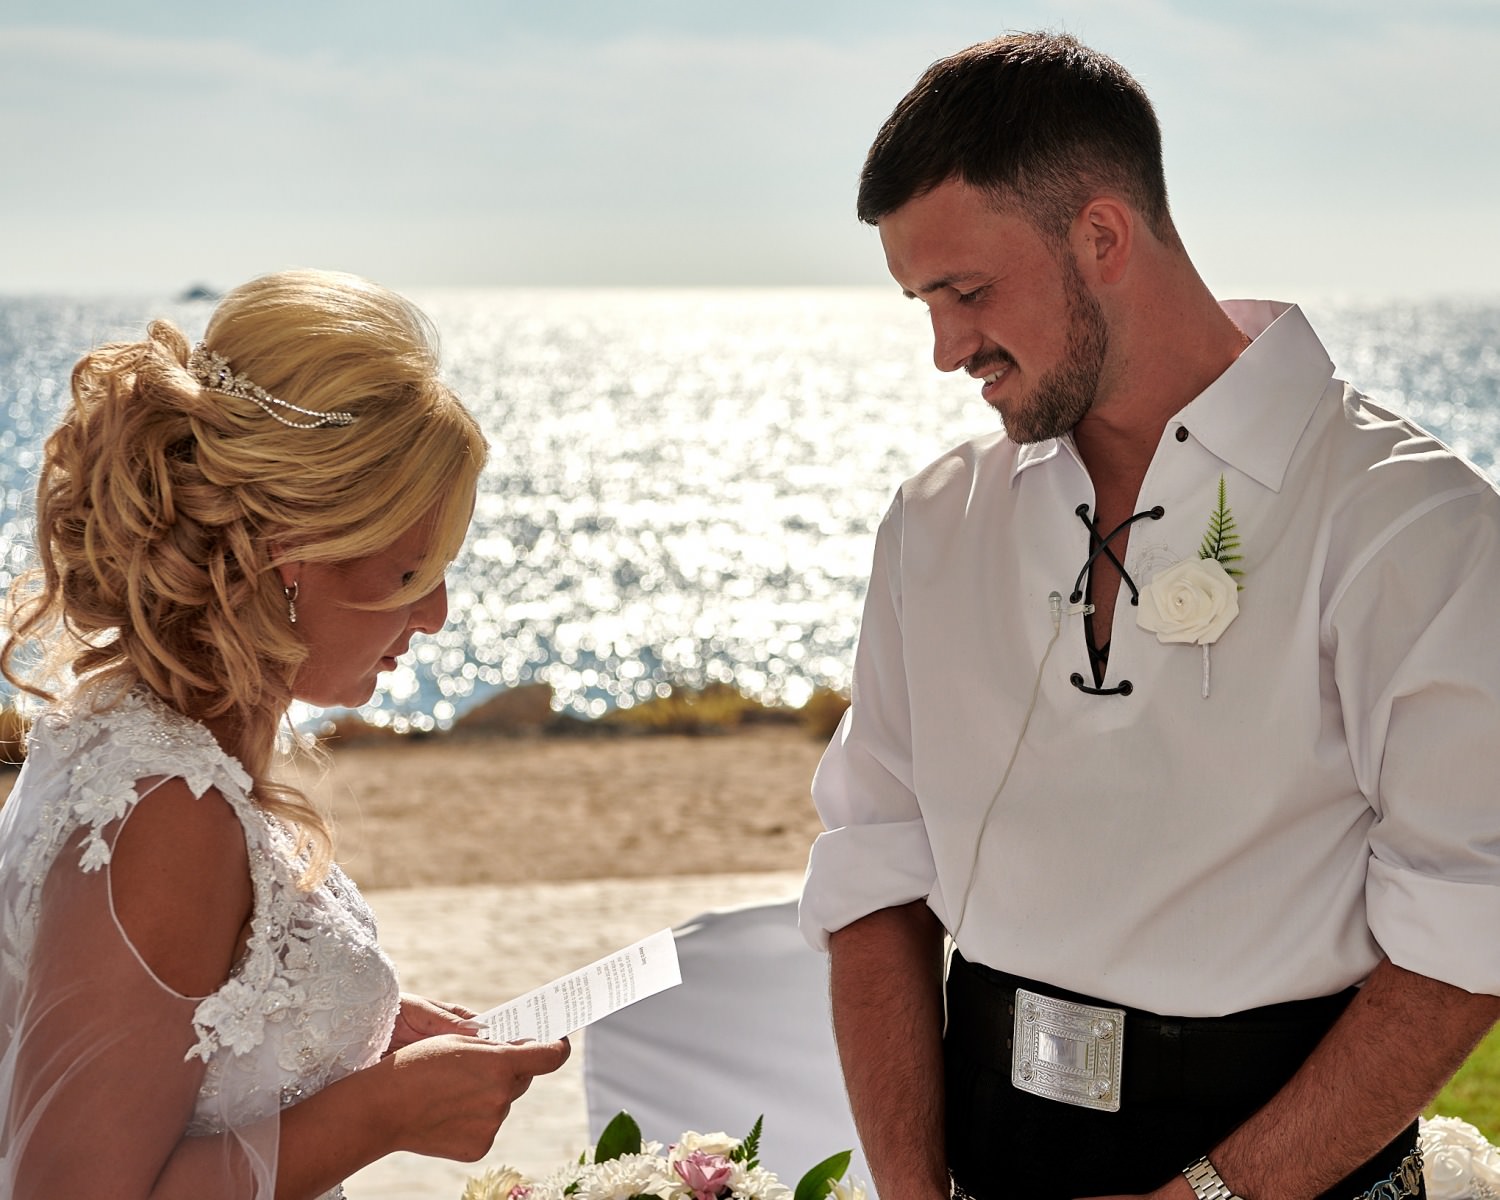 Why write your own wedding vows?